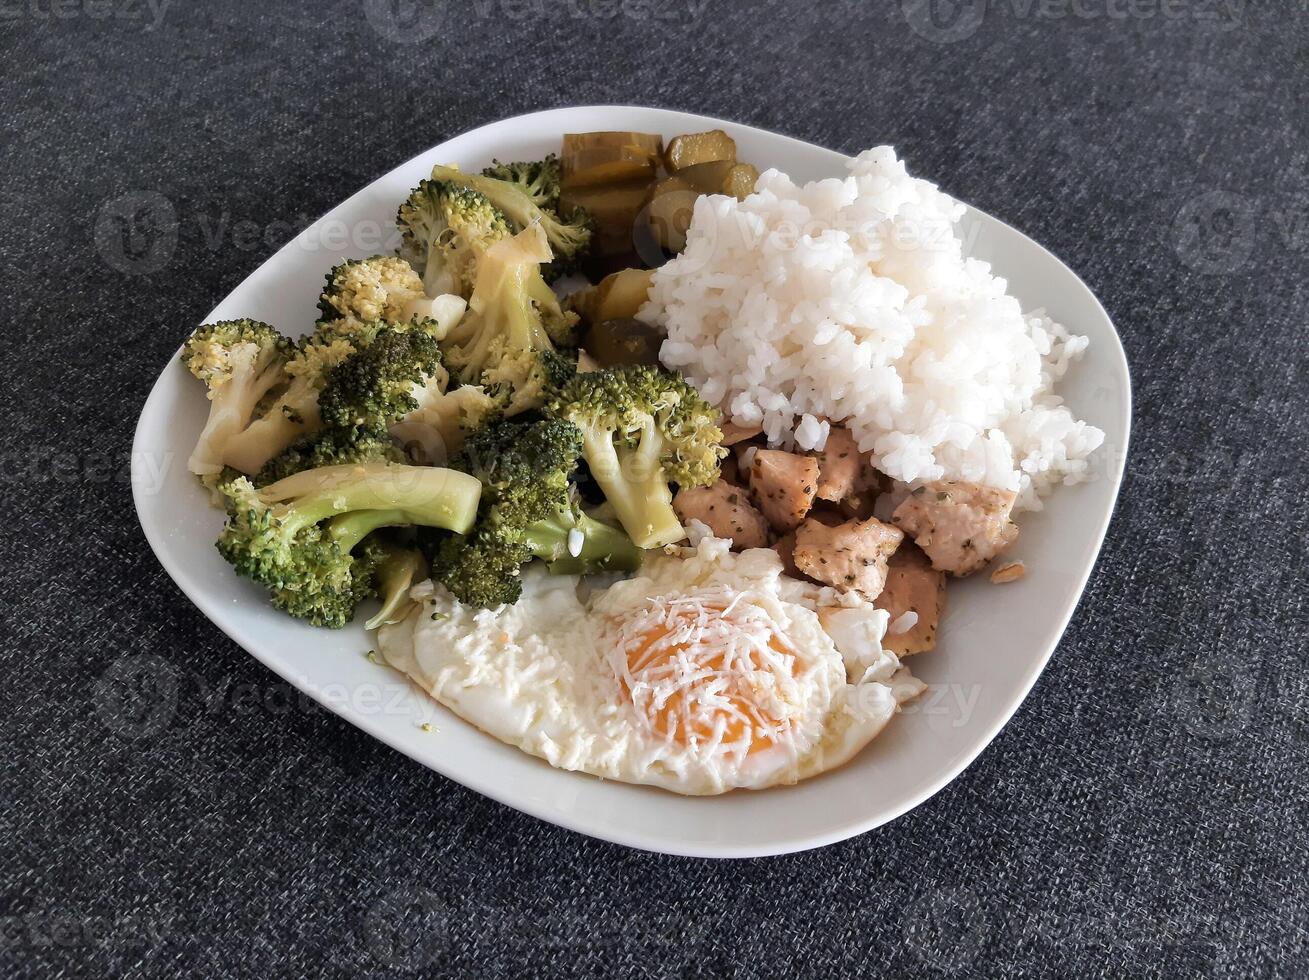 Homemade dish with broccoli, fried eggs with chese, chicken baked meat, rice and pickles served on white plate photo